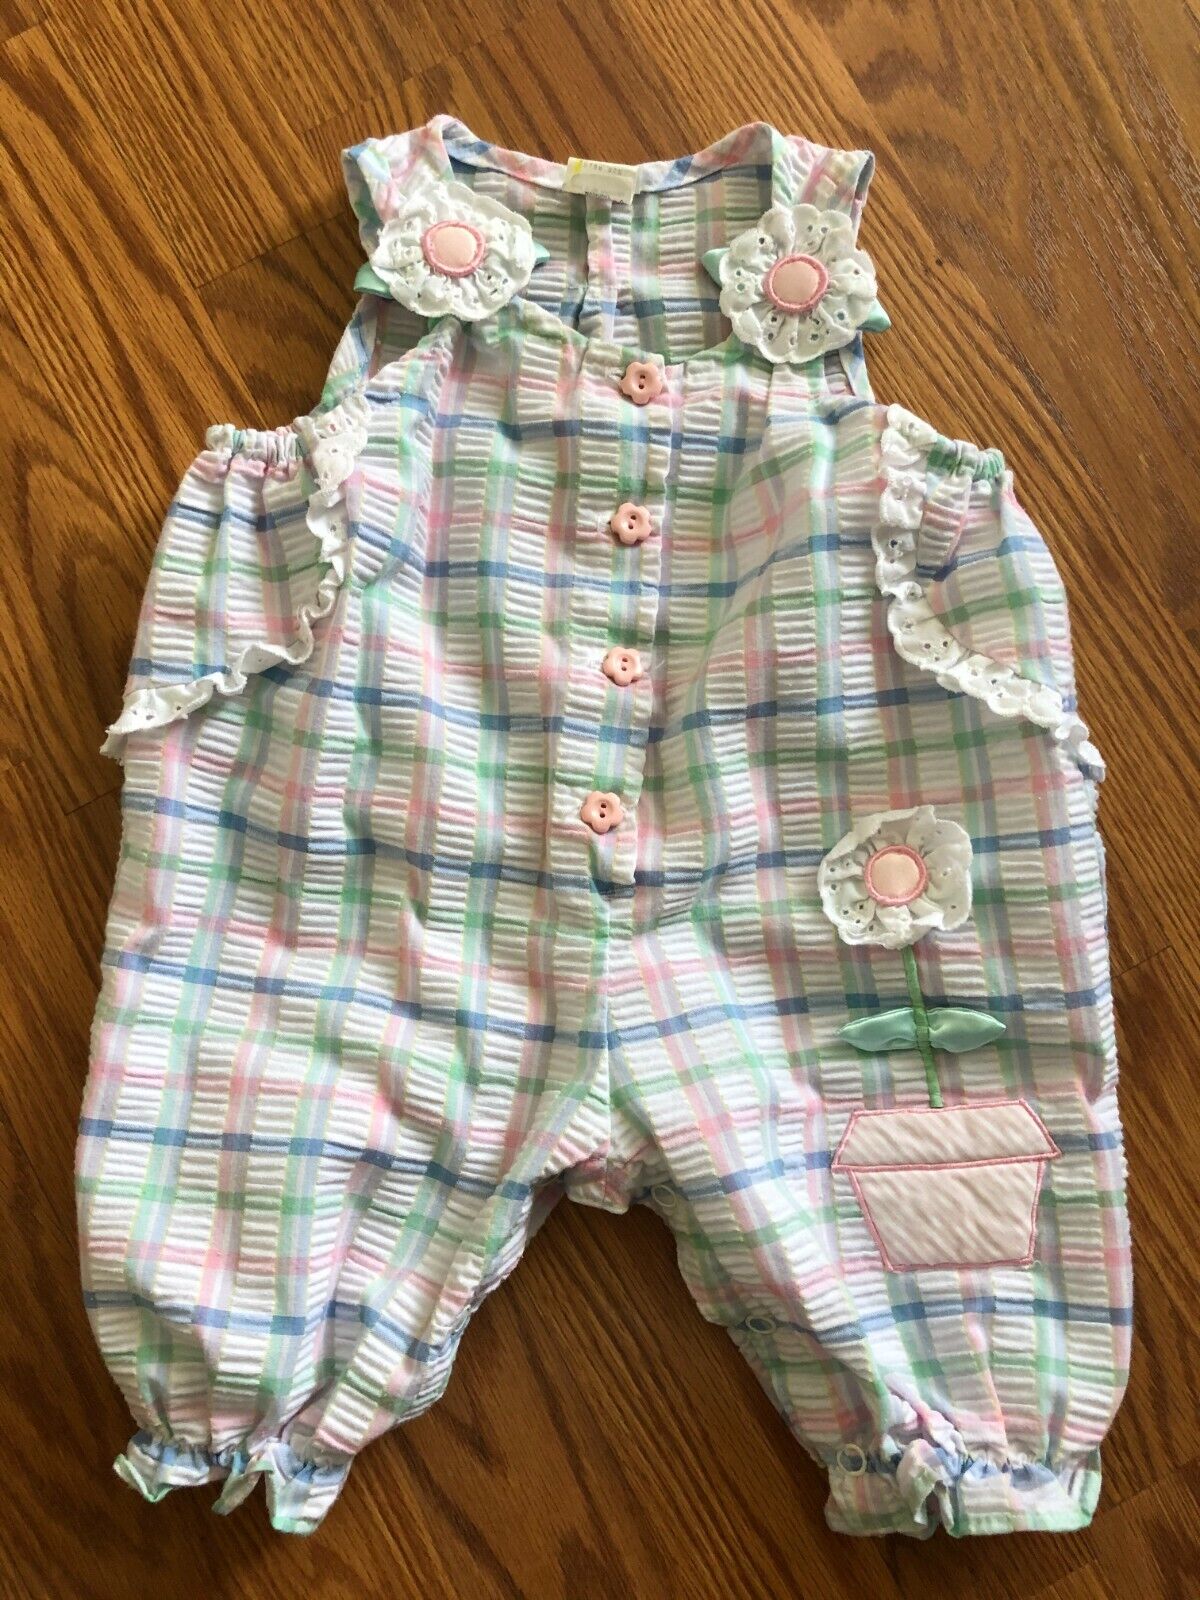 Vintage Baby Girls Plaid pastel color lace Ranking TOP8 romper with siz Columbus Mall white